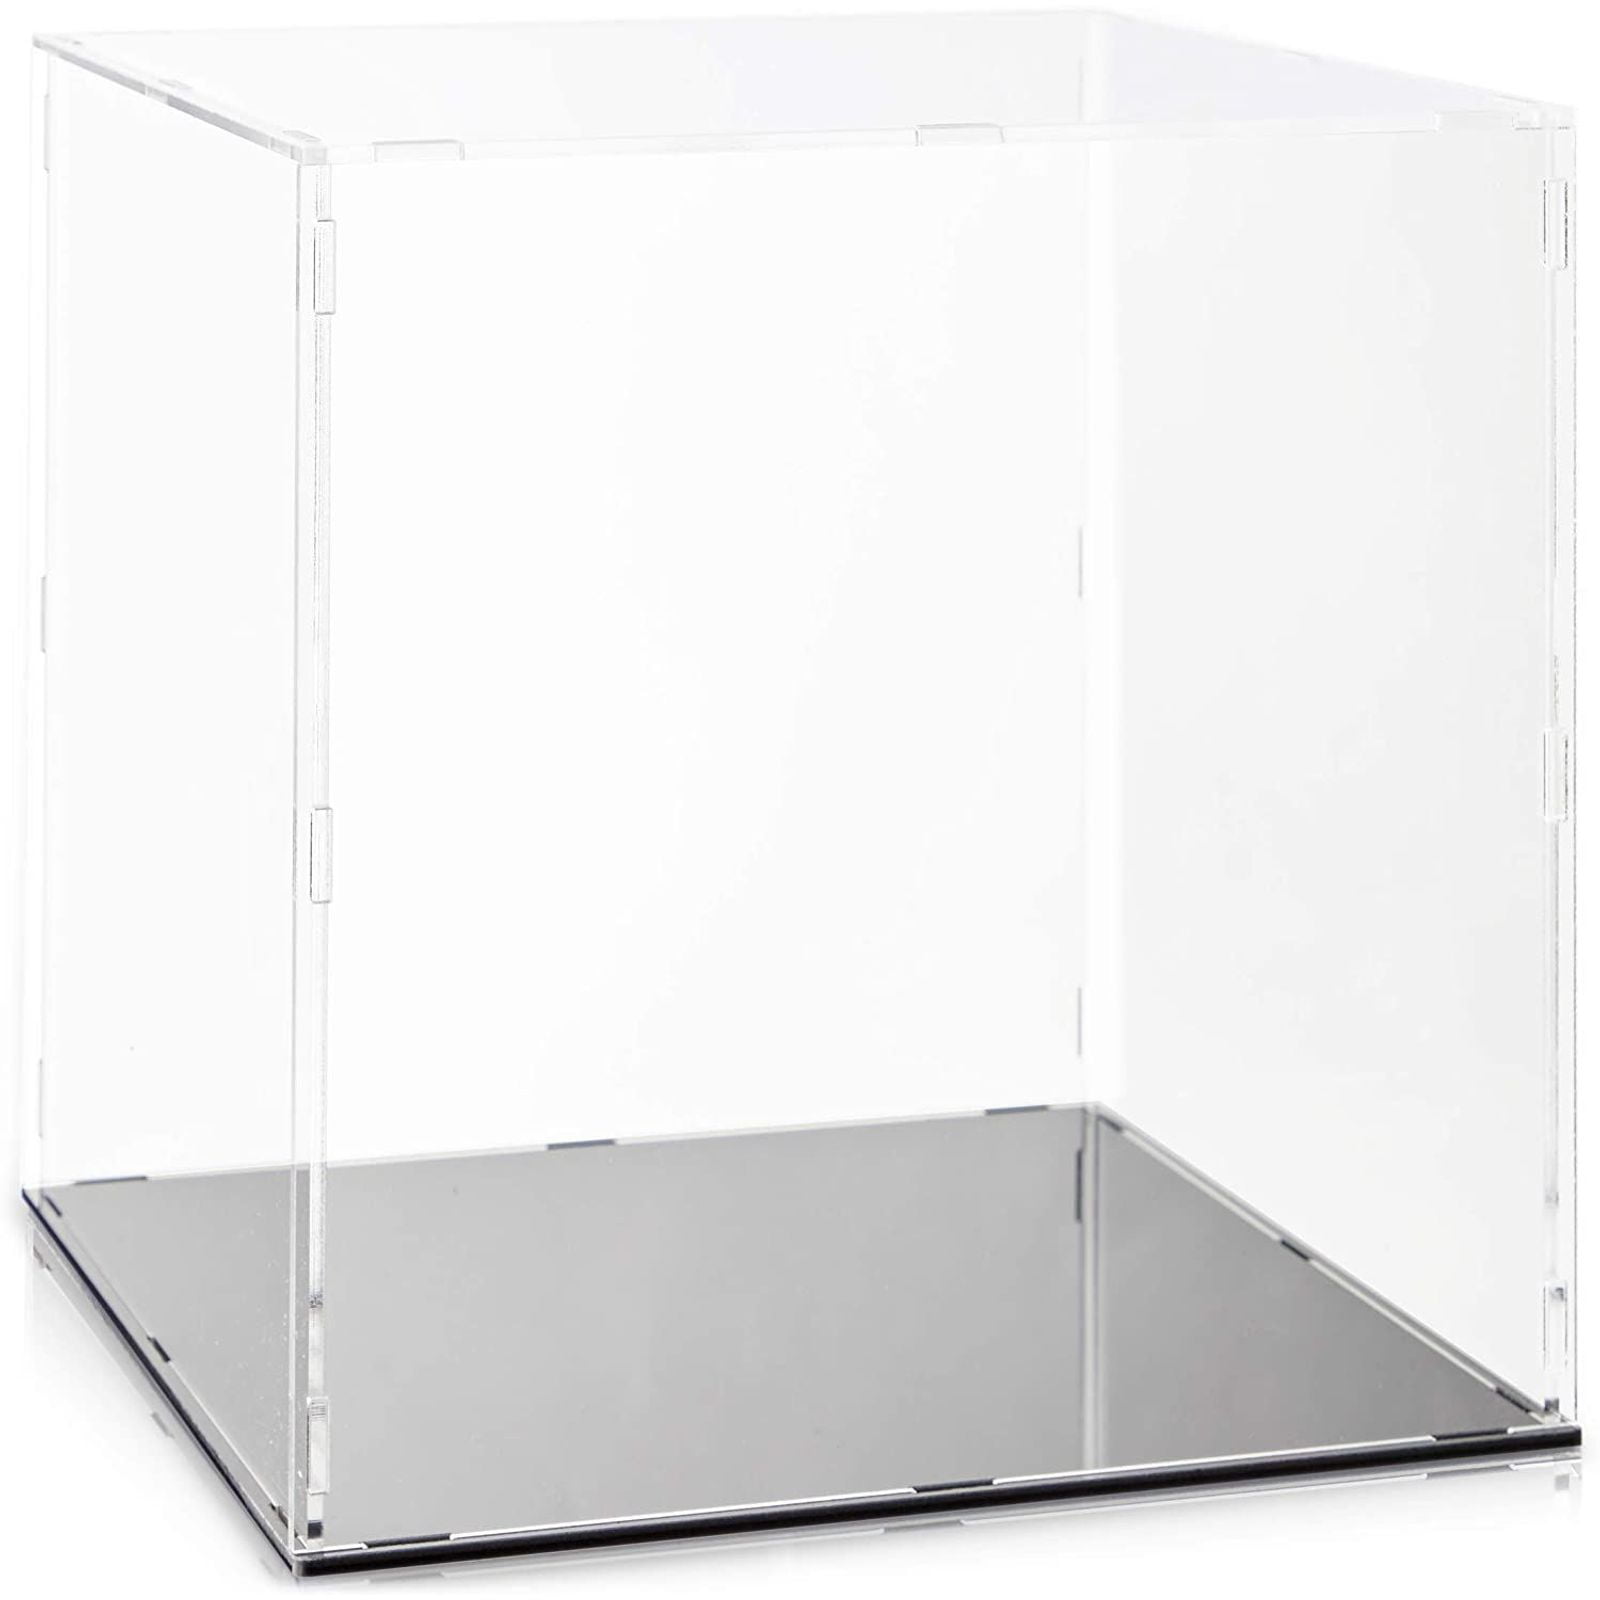 Details about   Big Clear Acrylic Display Box Stand Dustproof Tray Protection Cube Case For Show